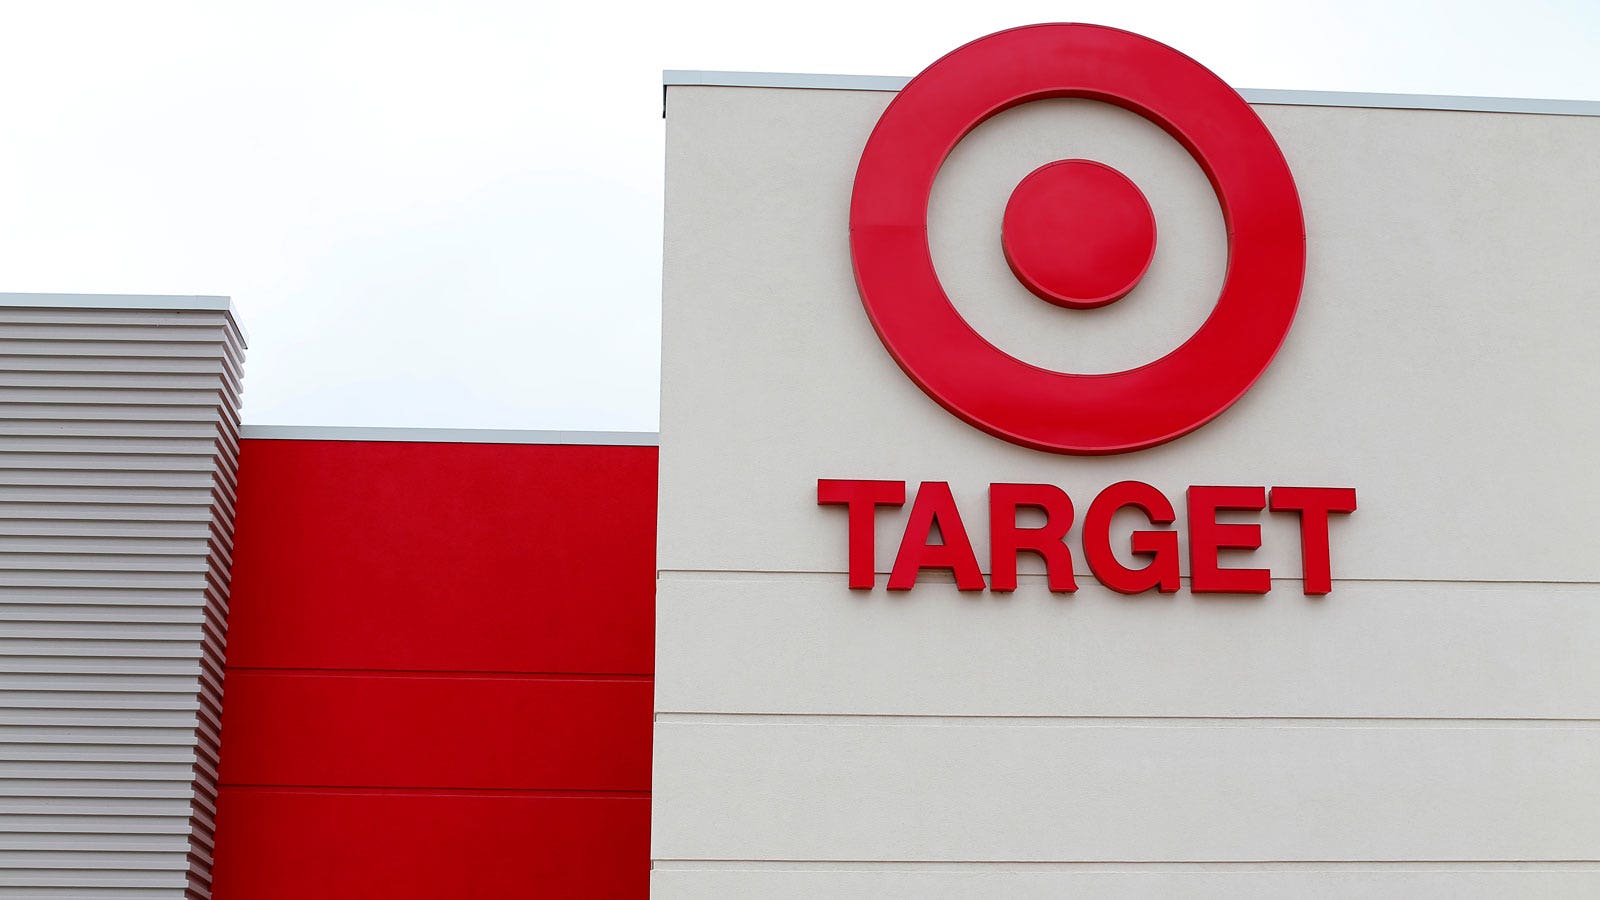 Target shares slide after disappointing 3Q earnings results